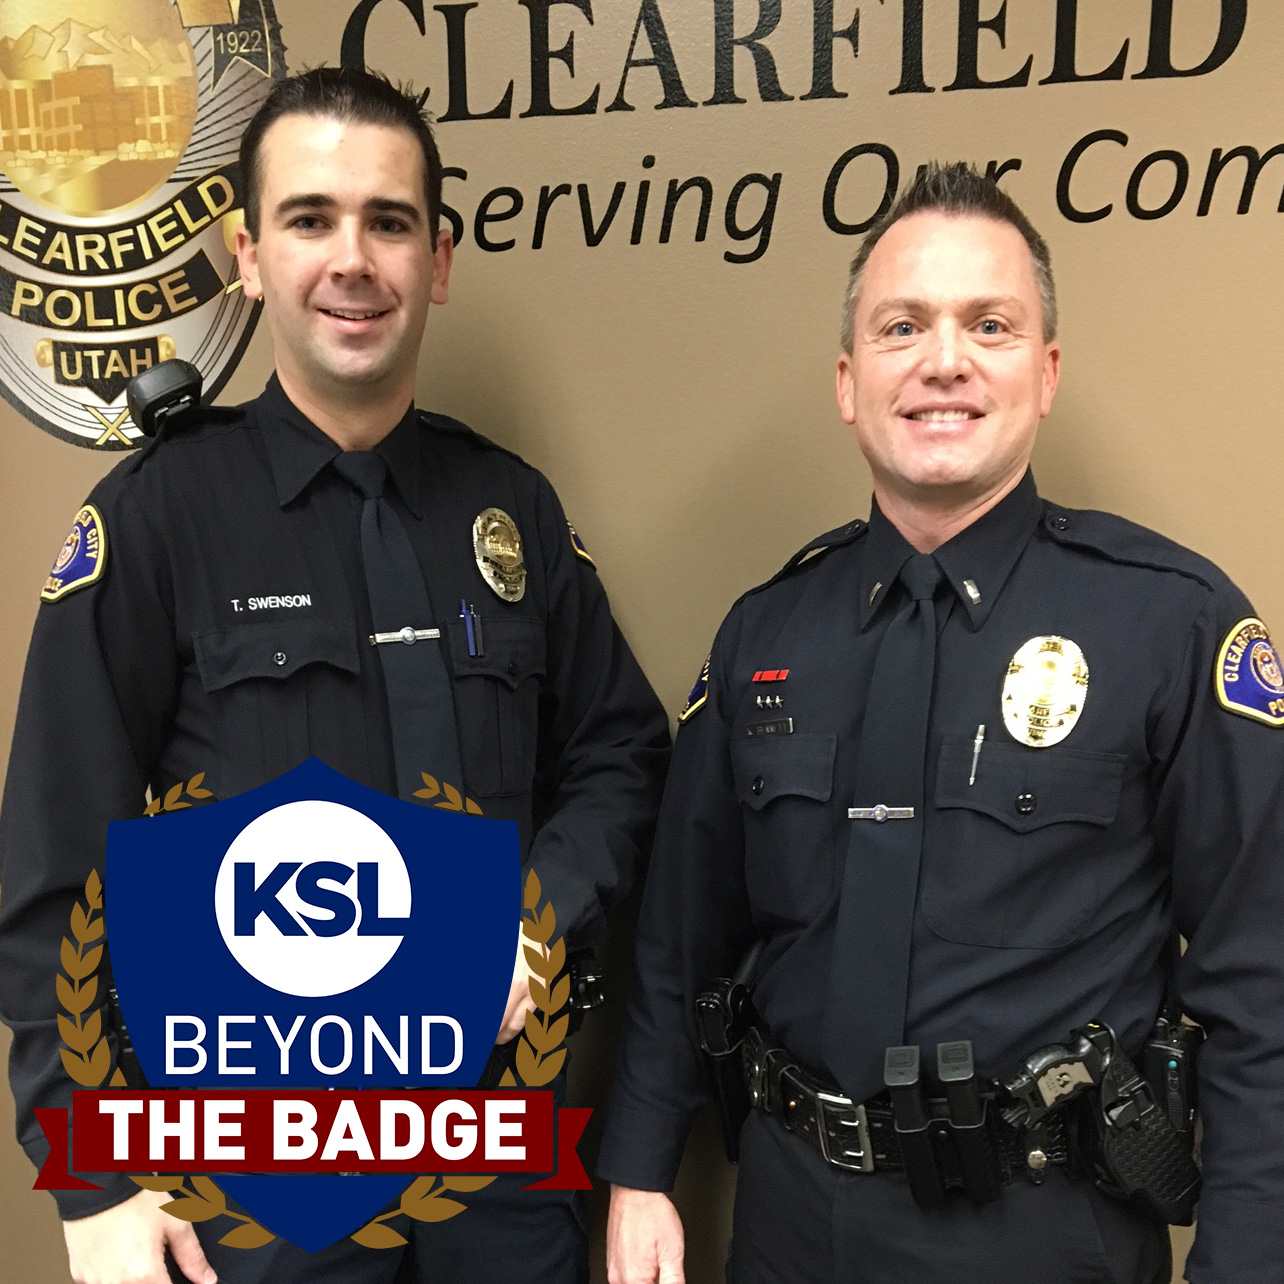 Officer Trevor Swenson, Clearfield City Police Department